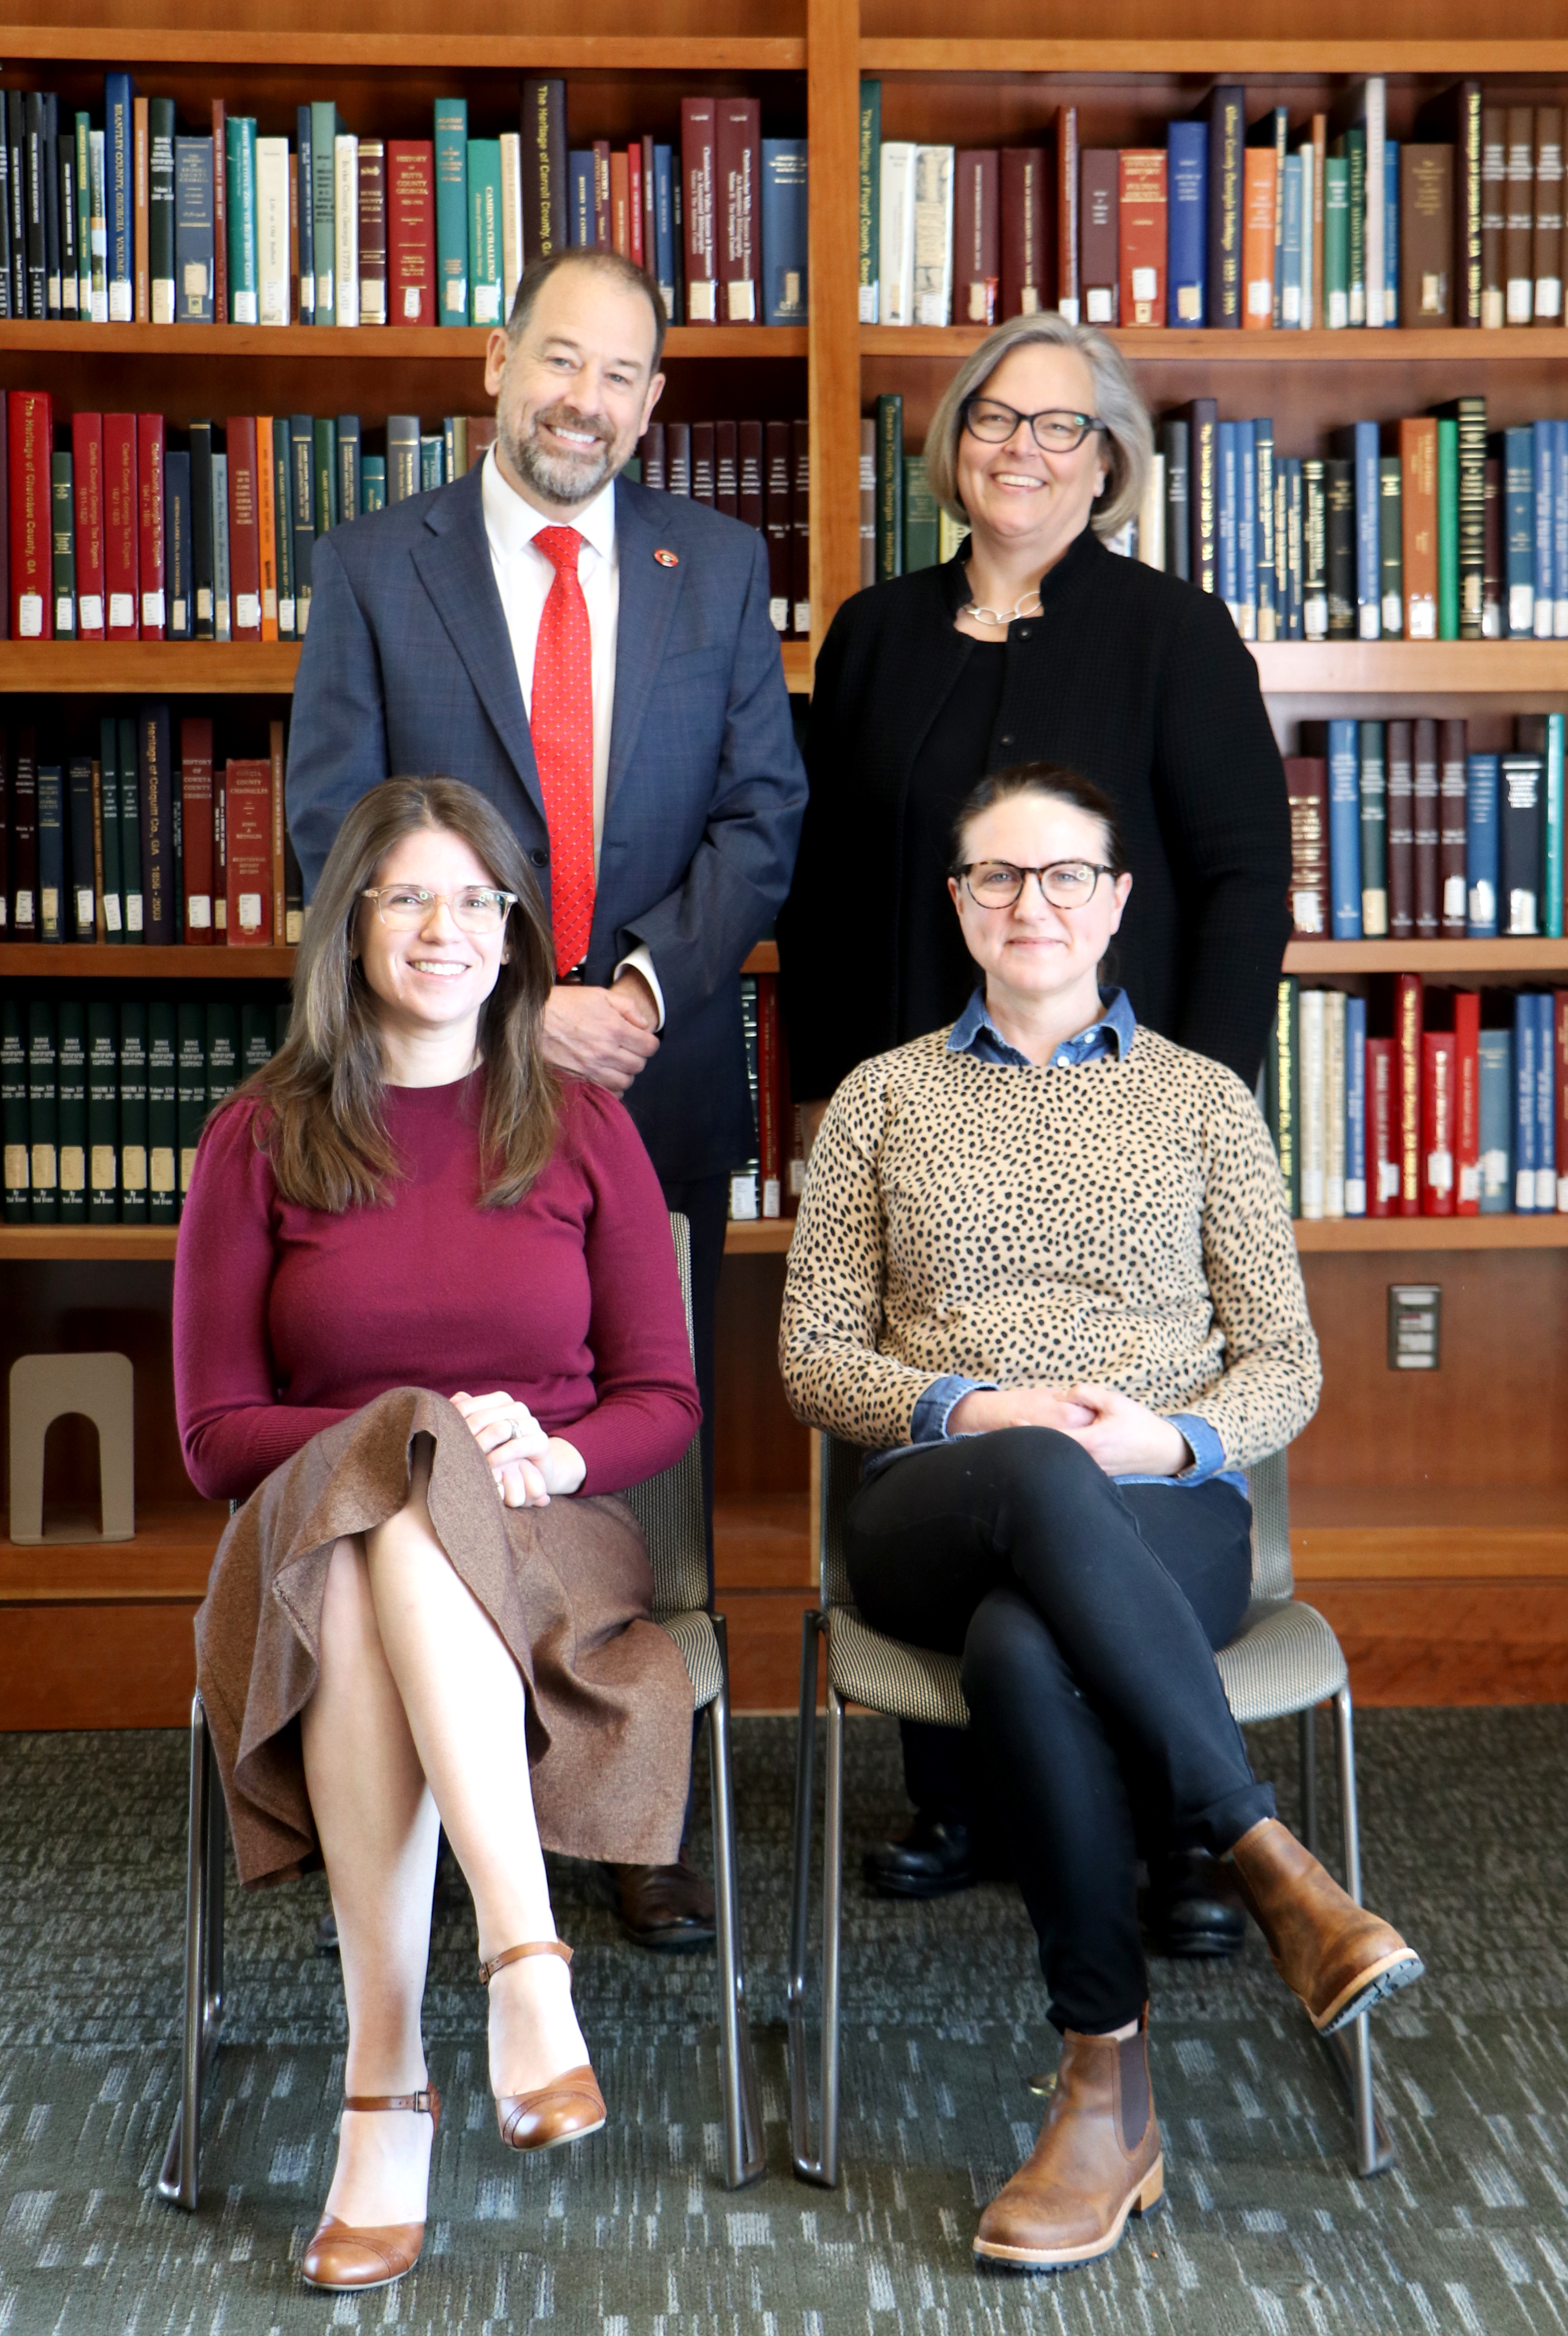 Pictured are UGA Libraries' administrative leadership team in front of a book case.Top row: Toby Graham, Emily Gore. Bottom row: Kat Stein, Sara Wright.